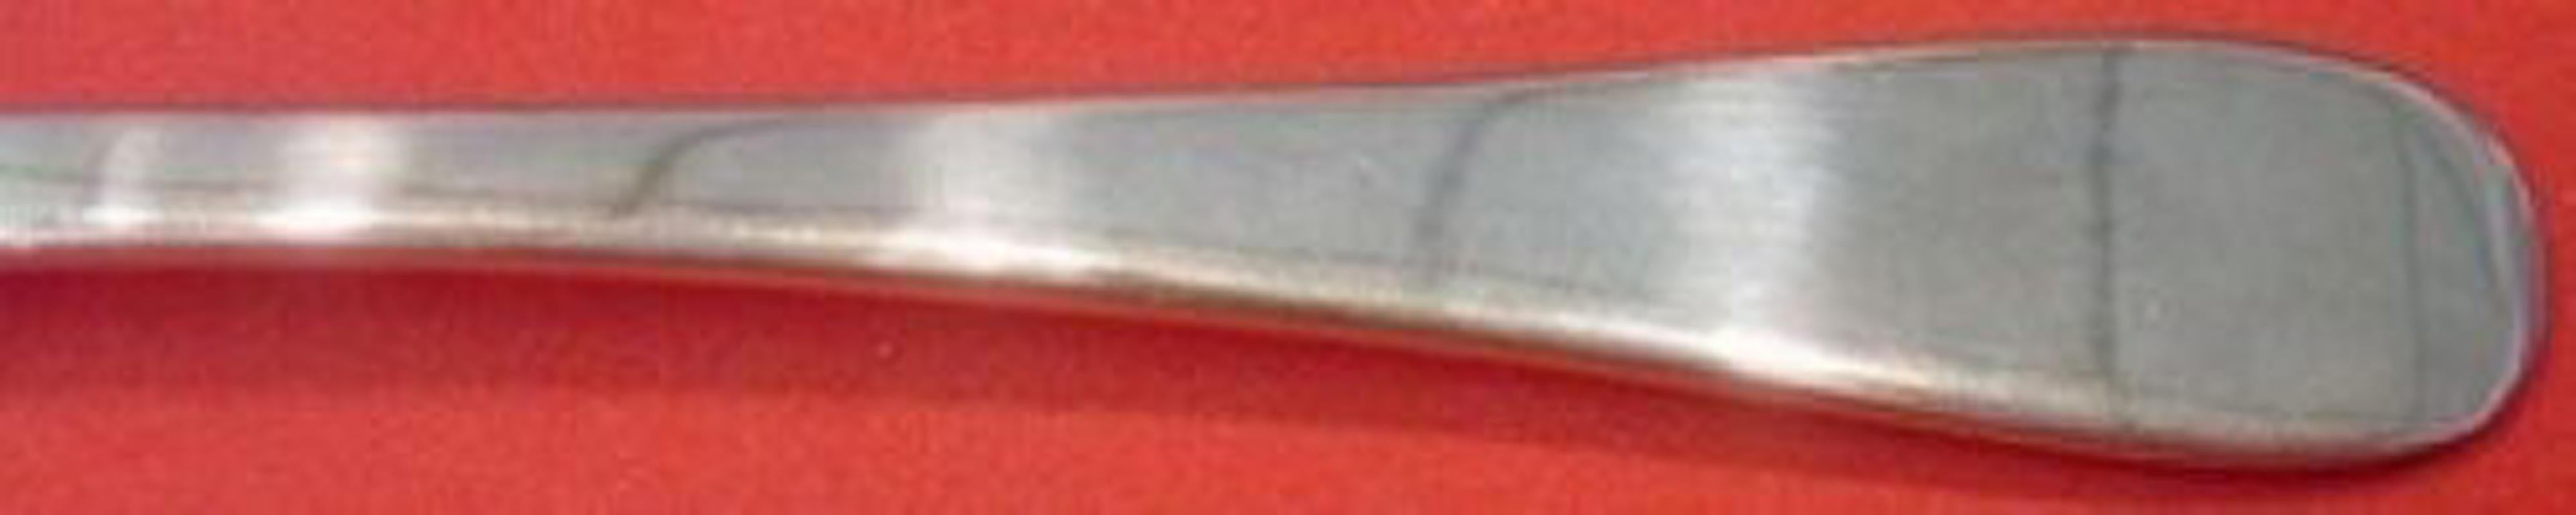 Sterling silver serving spoon, 8 5/8